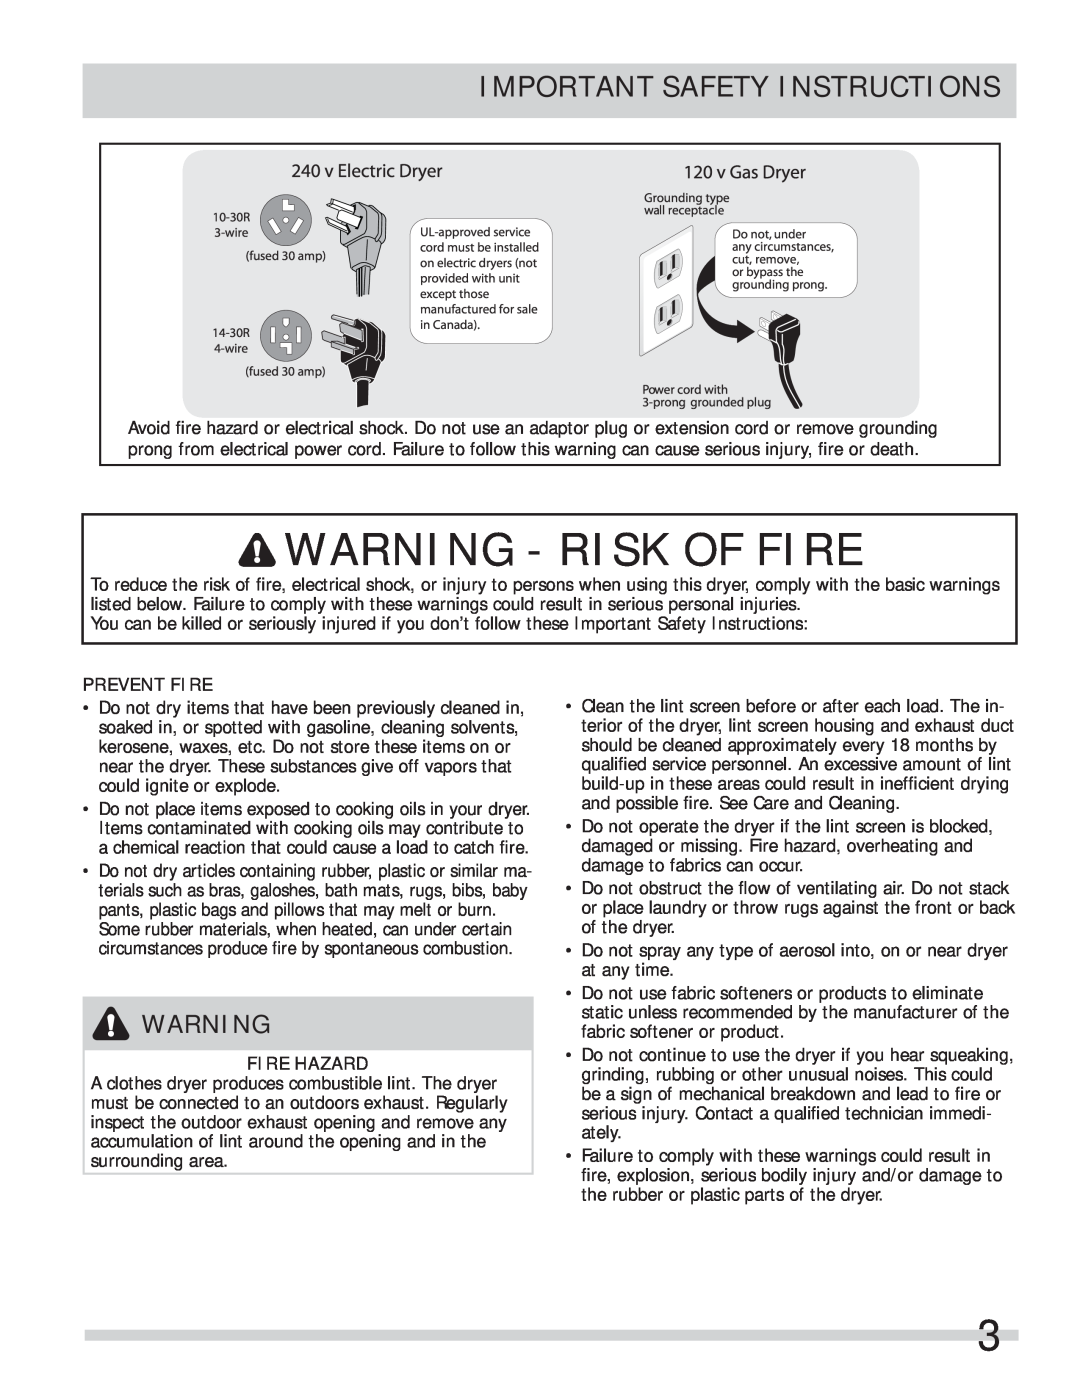 Frigidaire 137409900A(1111) Warning - Risk Of Fire, Important Safety Instructions, v Electric Dryer, Prevent Fire 